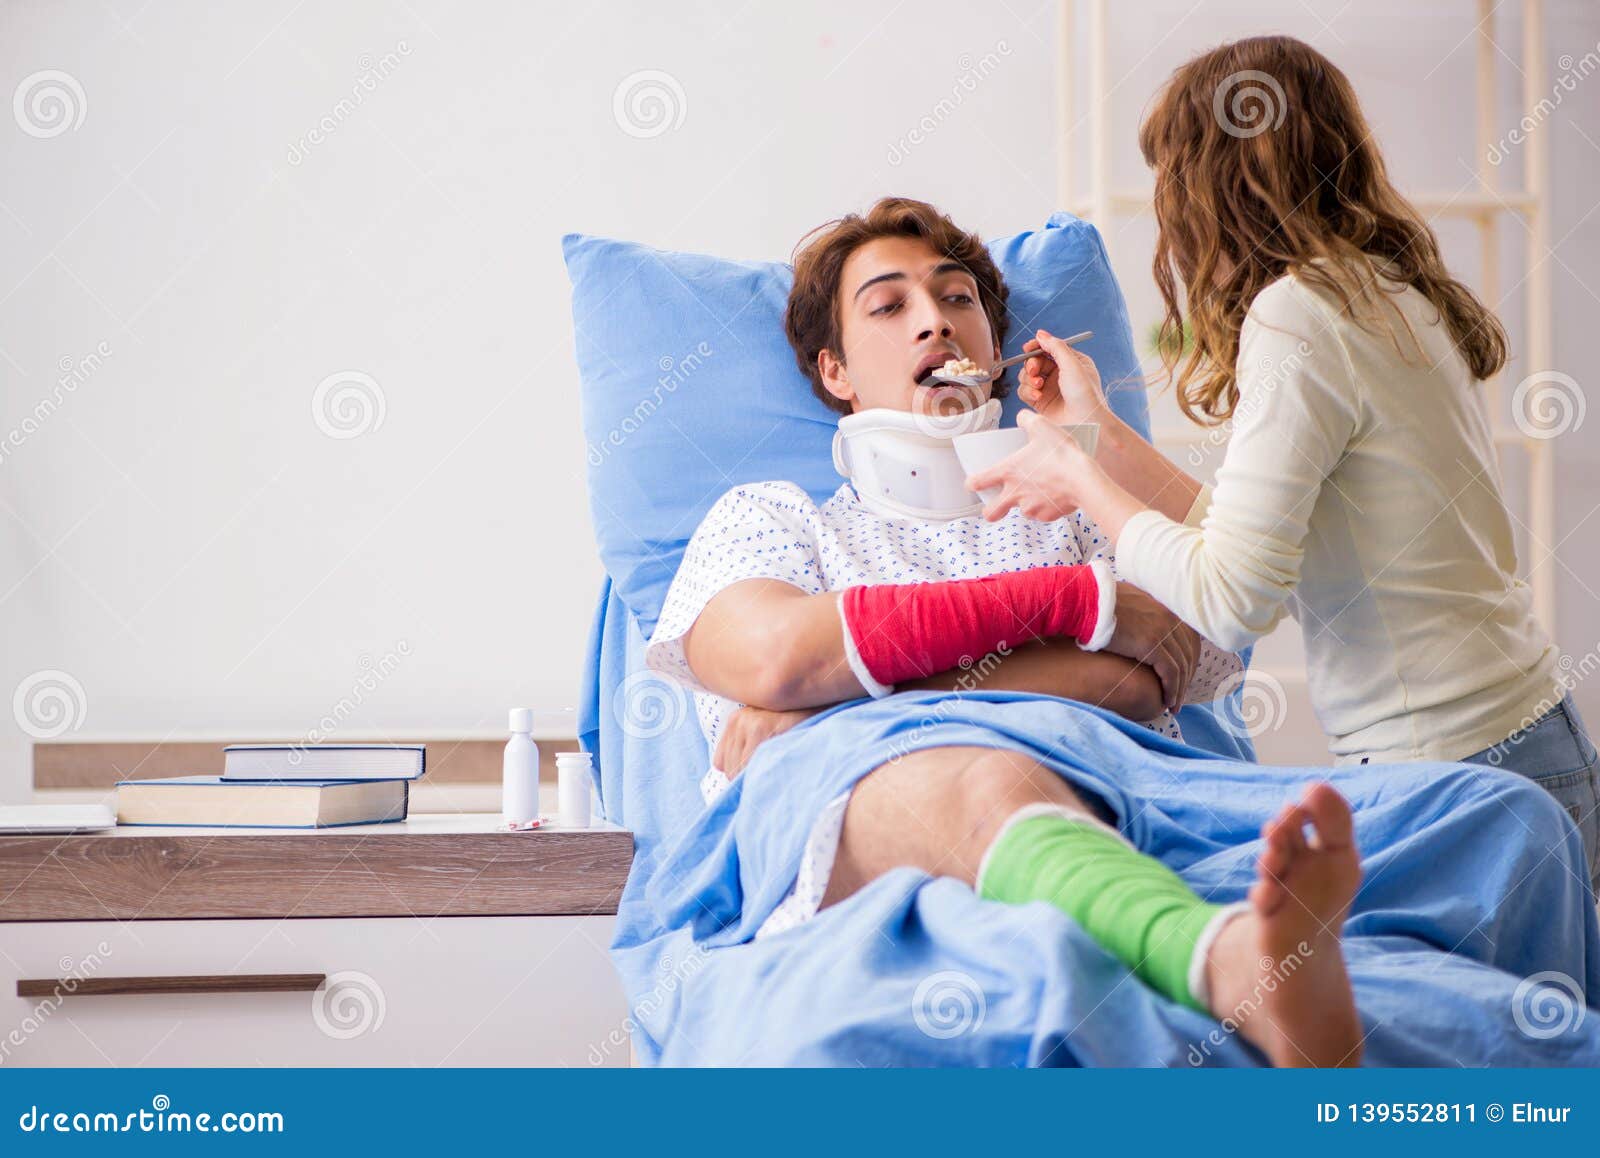 The Loving Wife Looking after Injured Husband in Hospital Stock Image ... picture